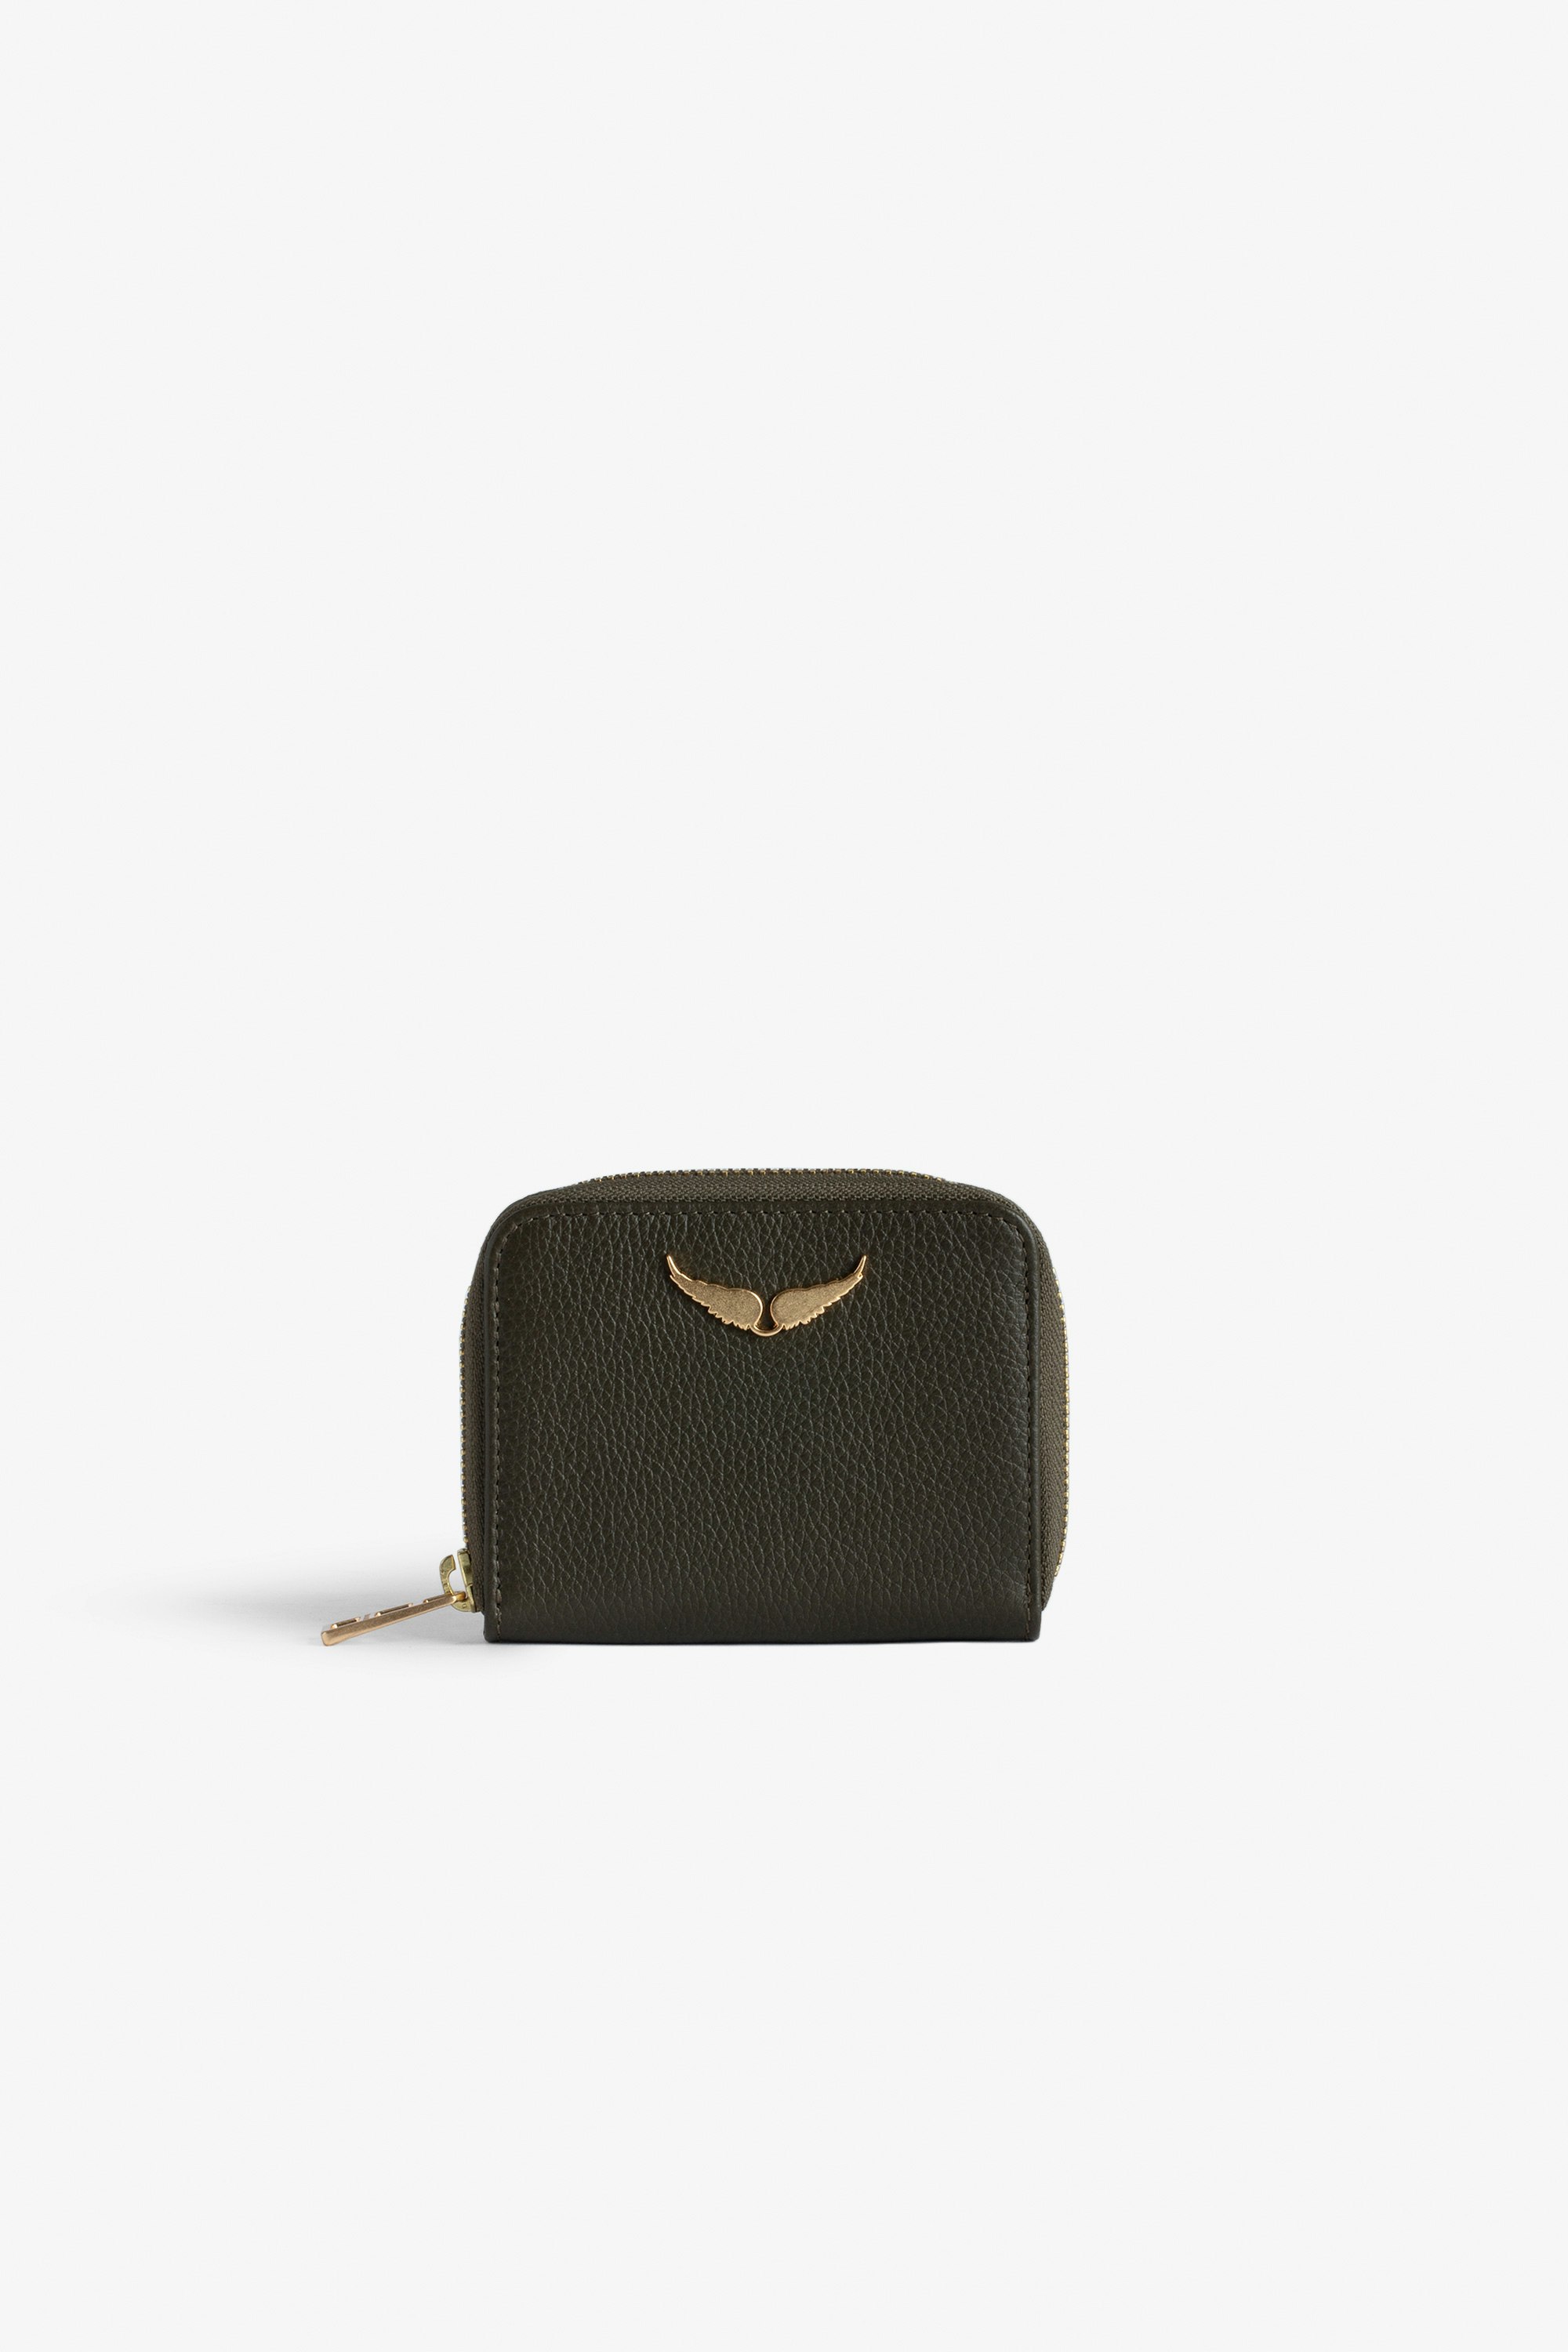 Mini ZV Coin Purse - Women’s khaki grained leather card holder with gold-tone wings charm.